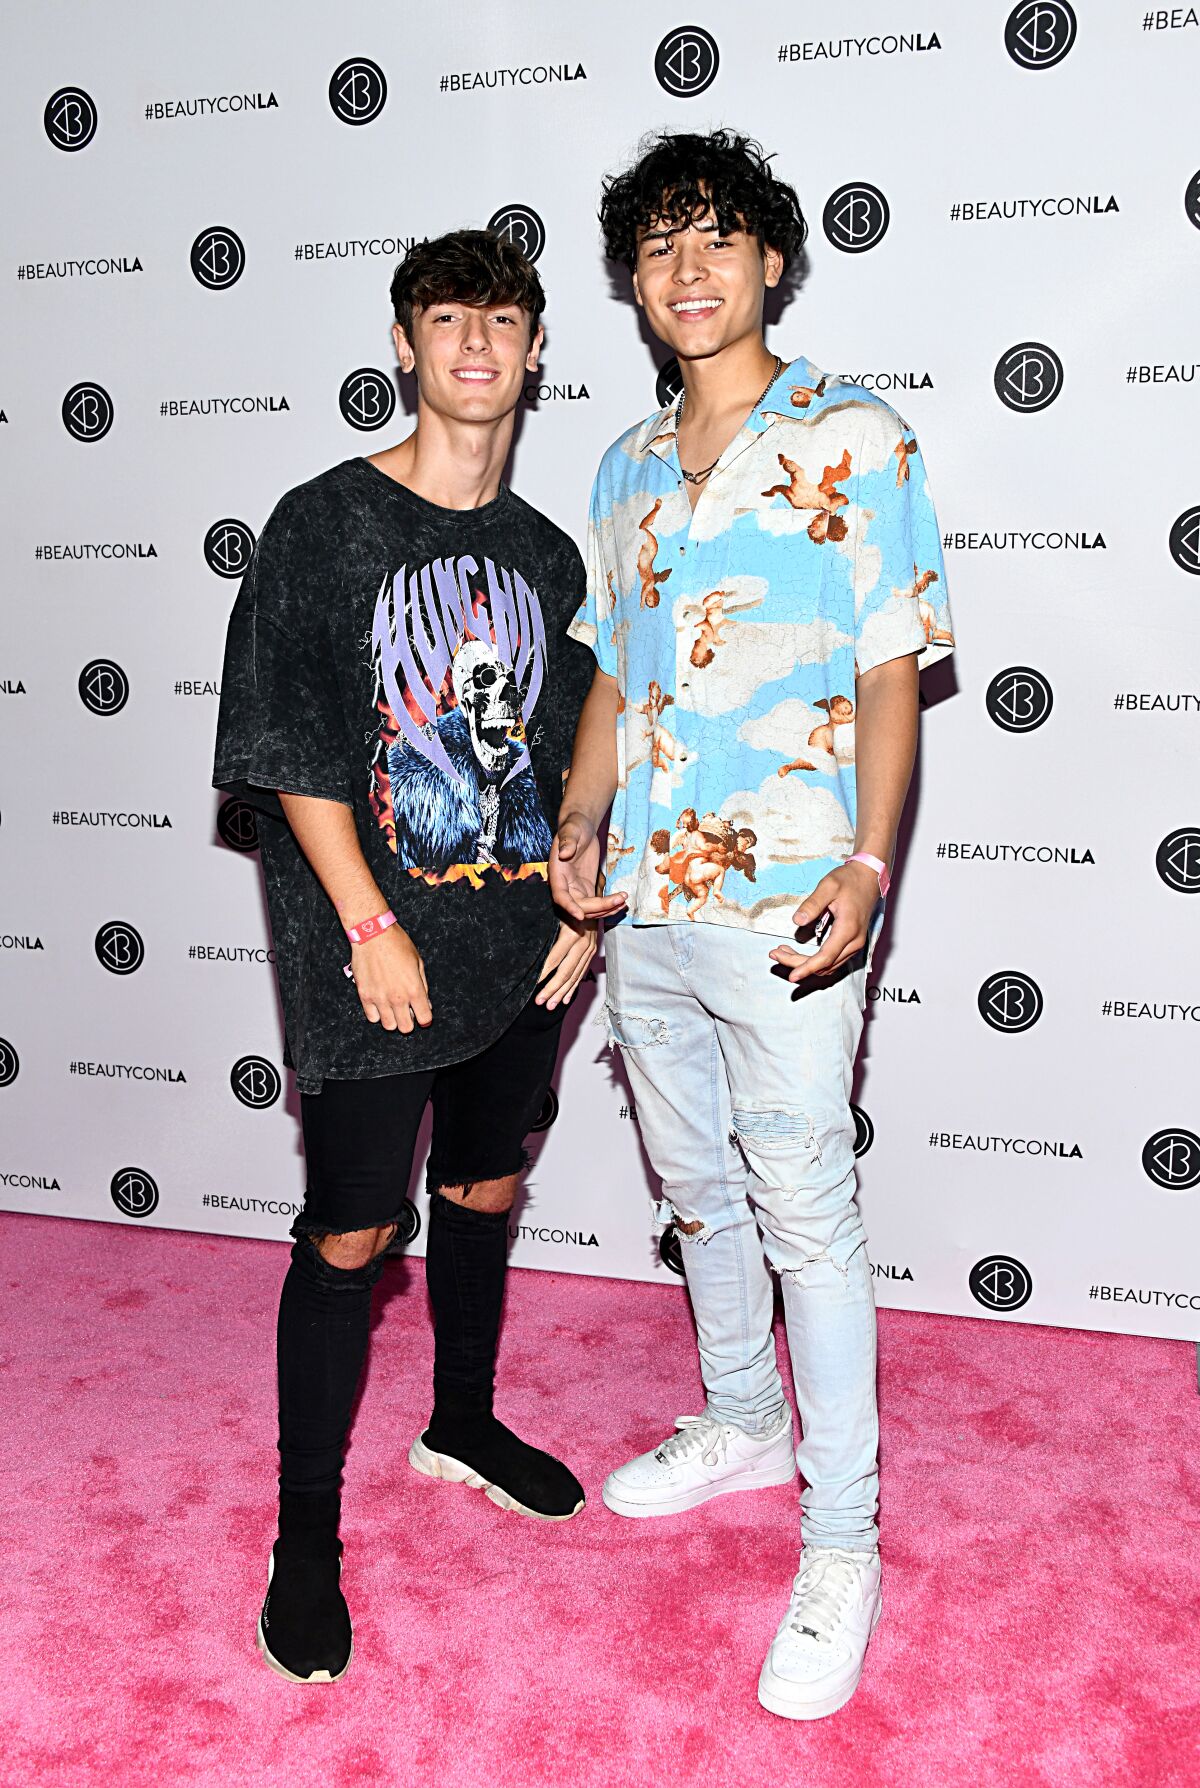   Bryce Hall, left, and Giovanny Valencia at Beautycon Festival Los Angeles in 2019.